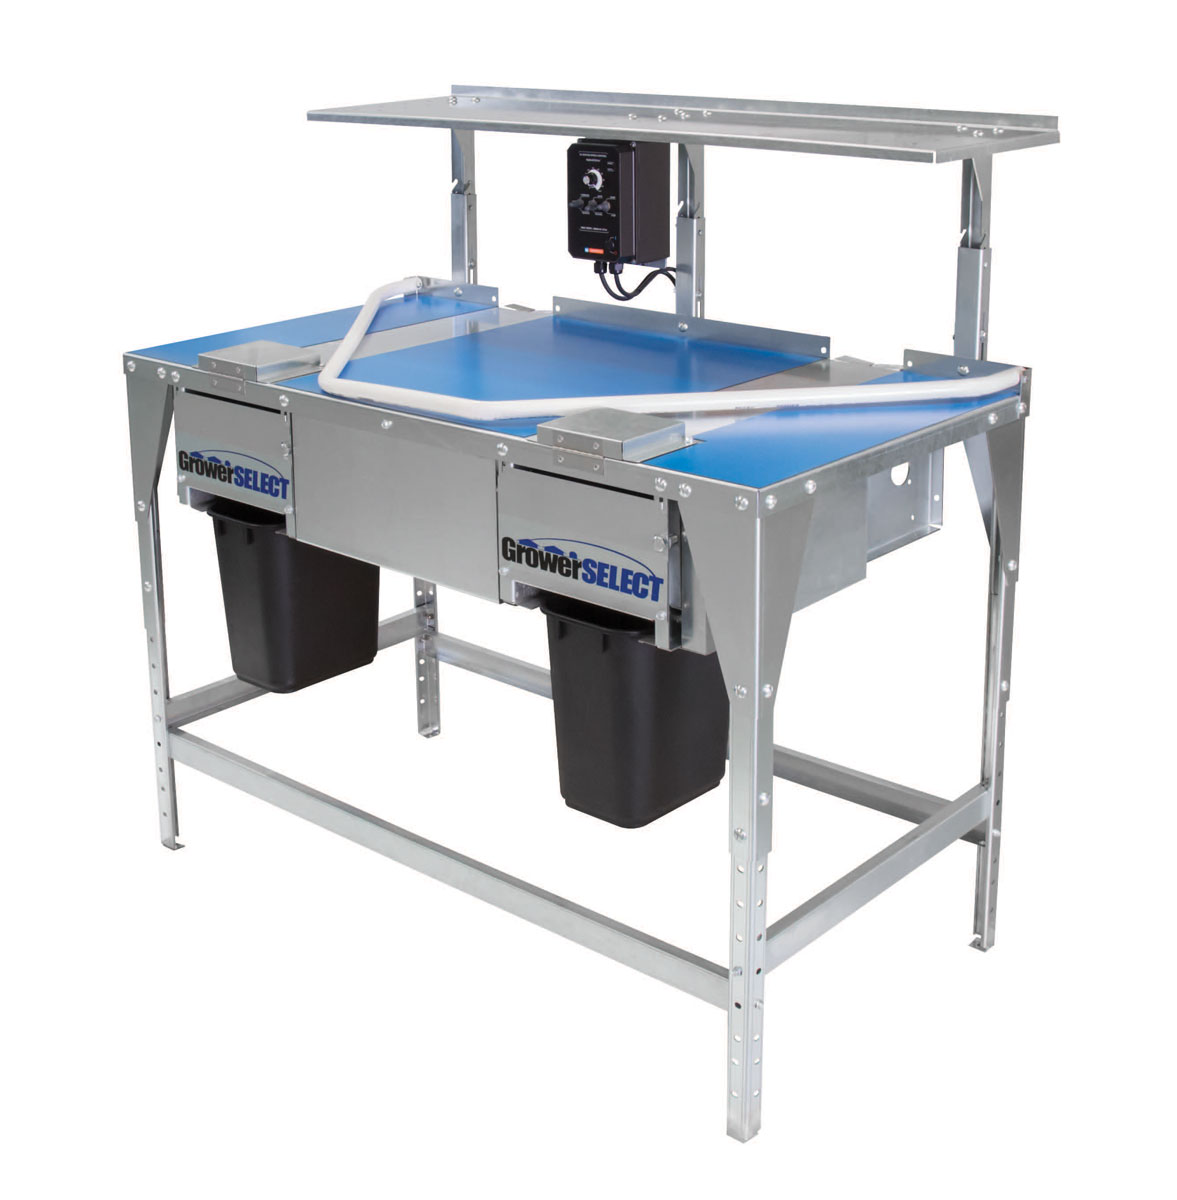 GrowerSELECT Egg Collection Tables are available in side-belt and center-belt models. (Shown: Side-belt egg collection table, Item # GSN-5200)